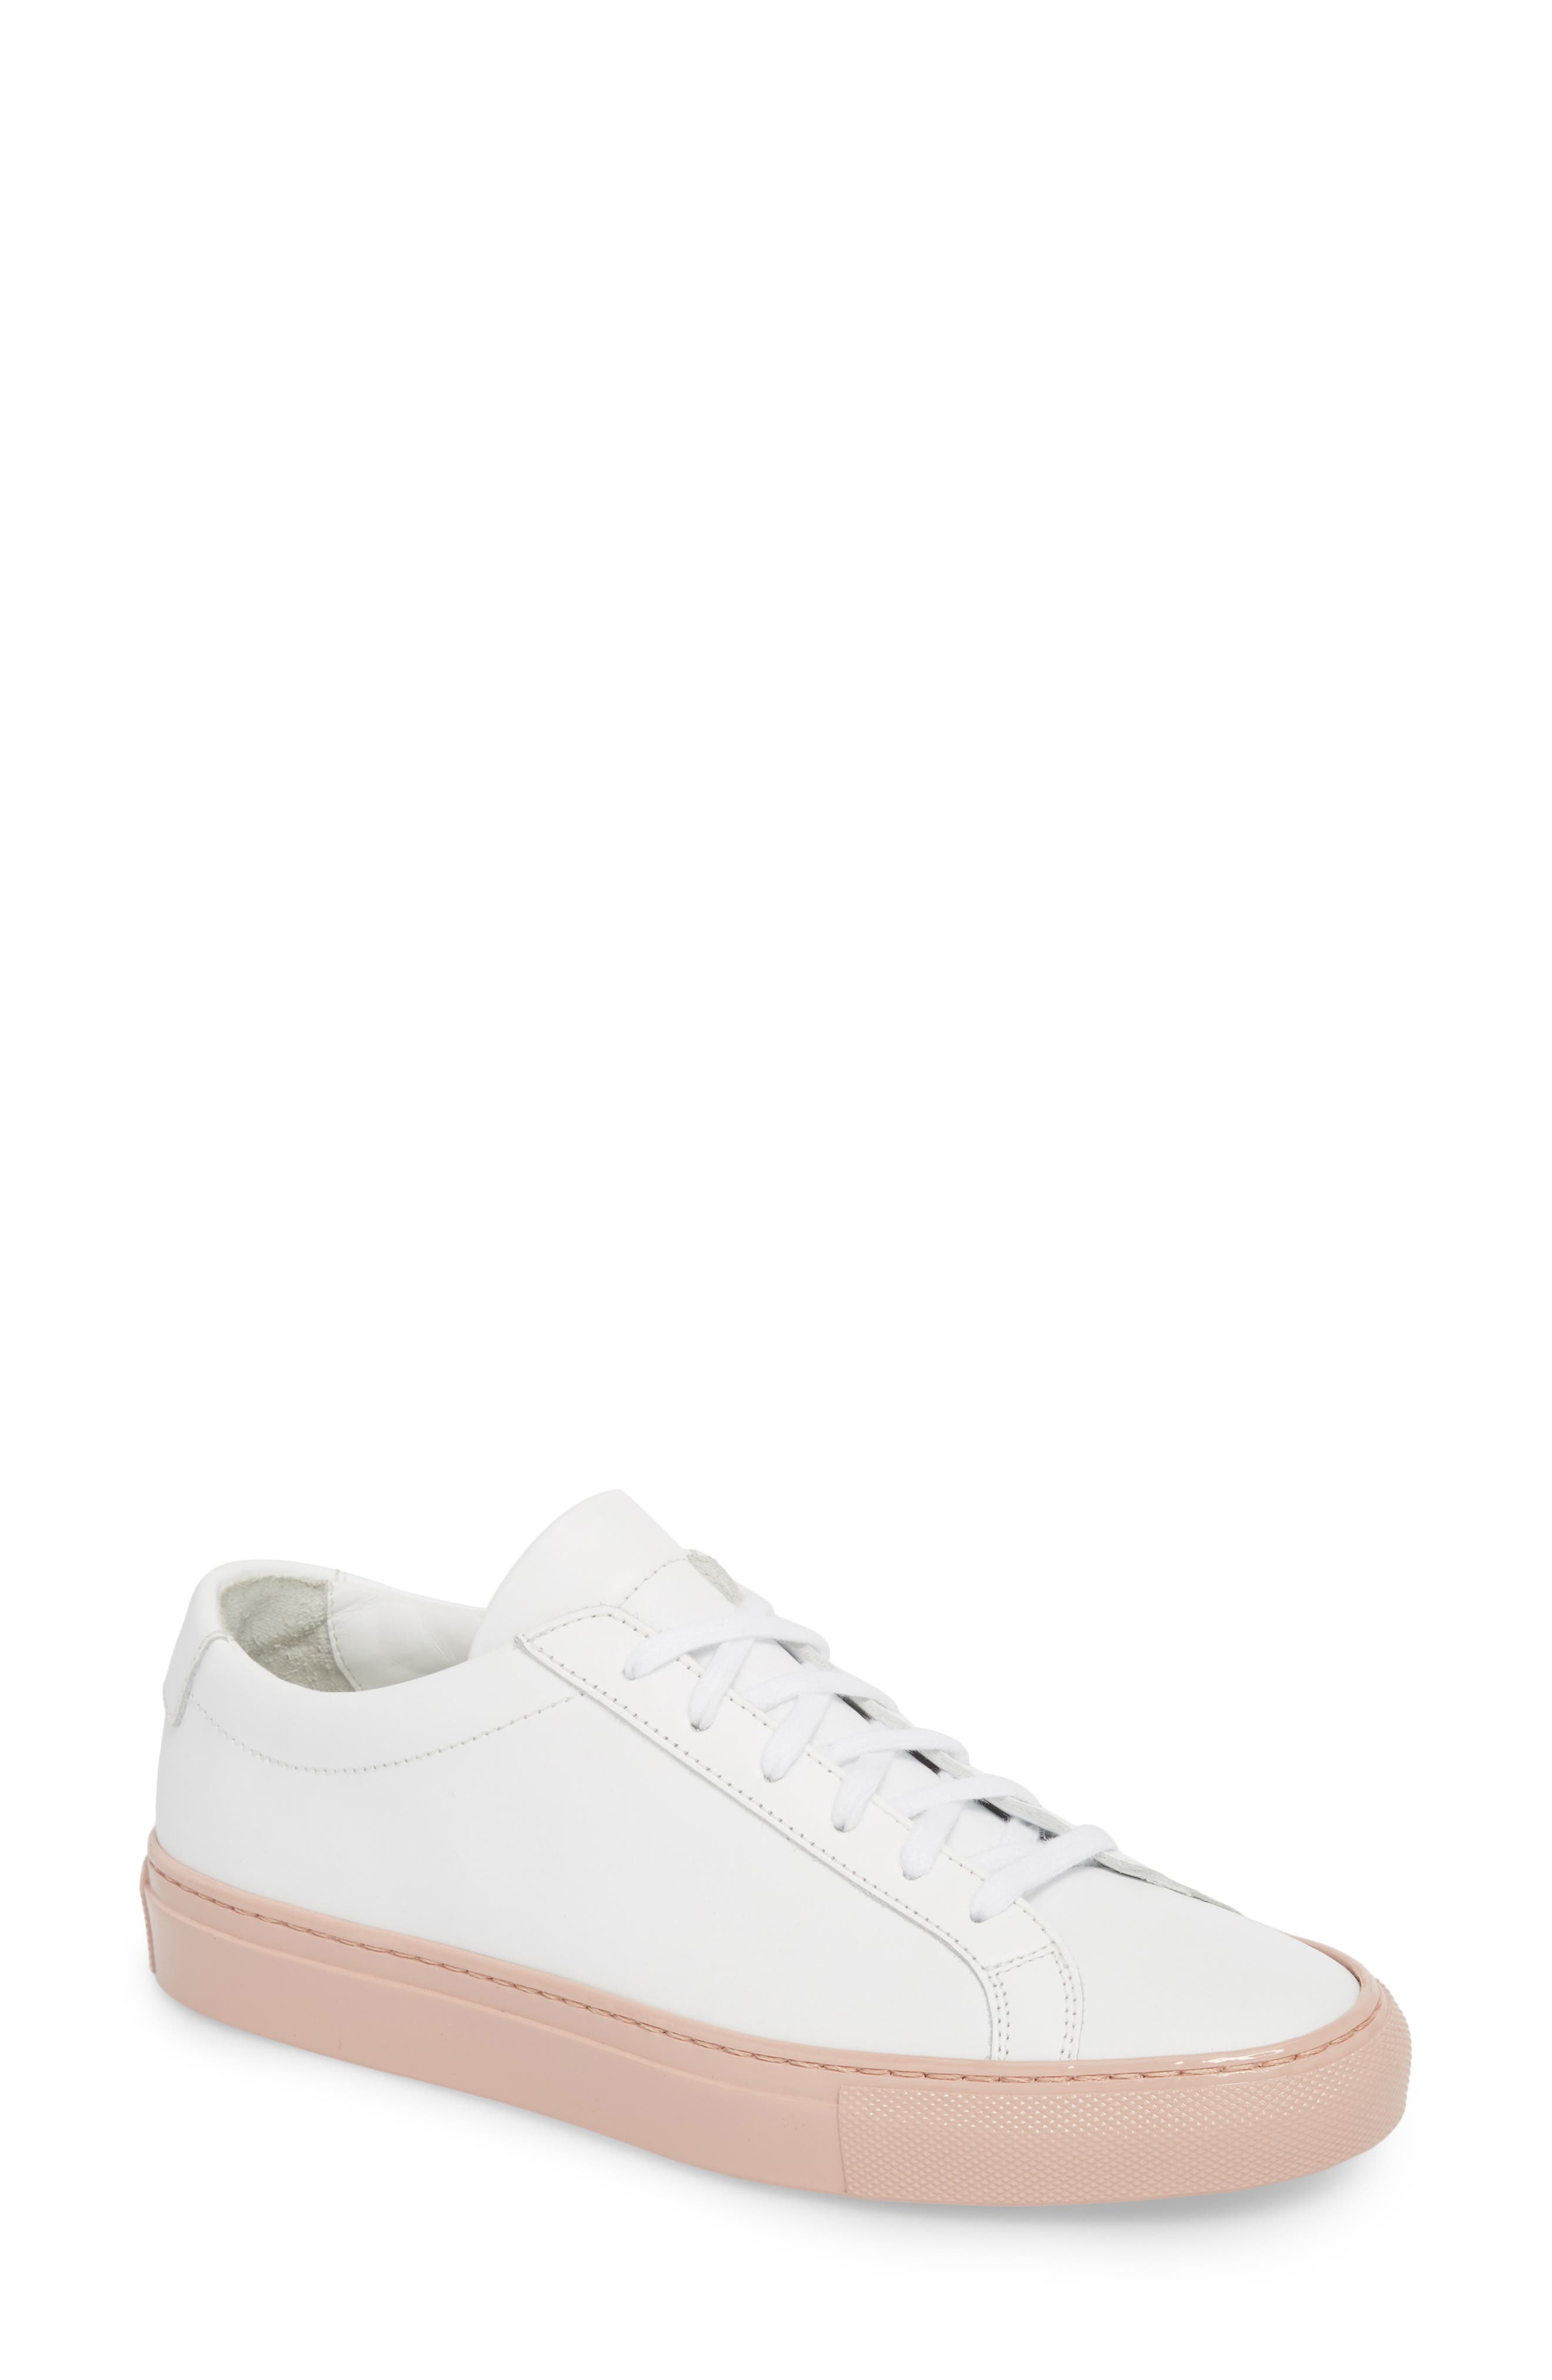 common projects nordstrom